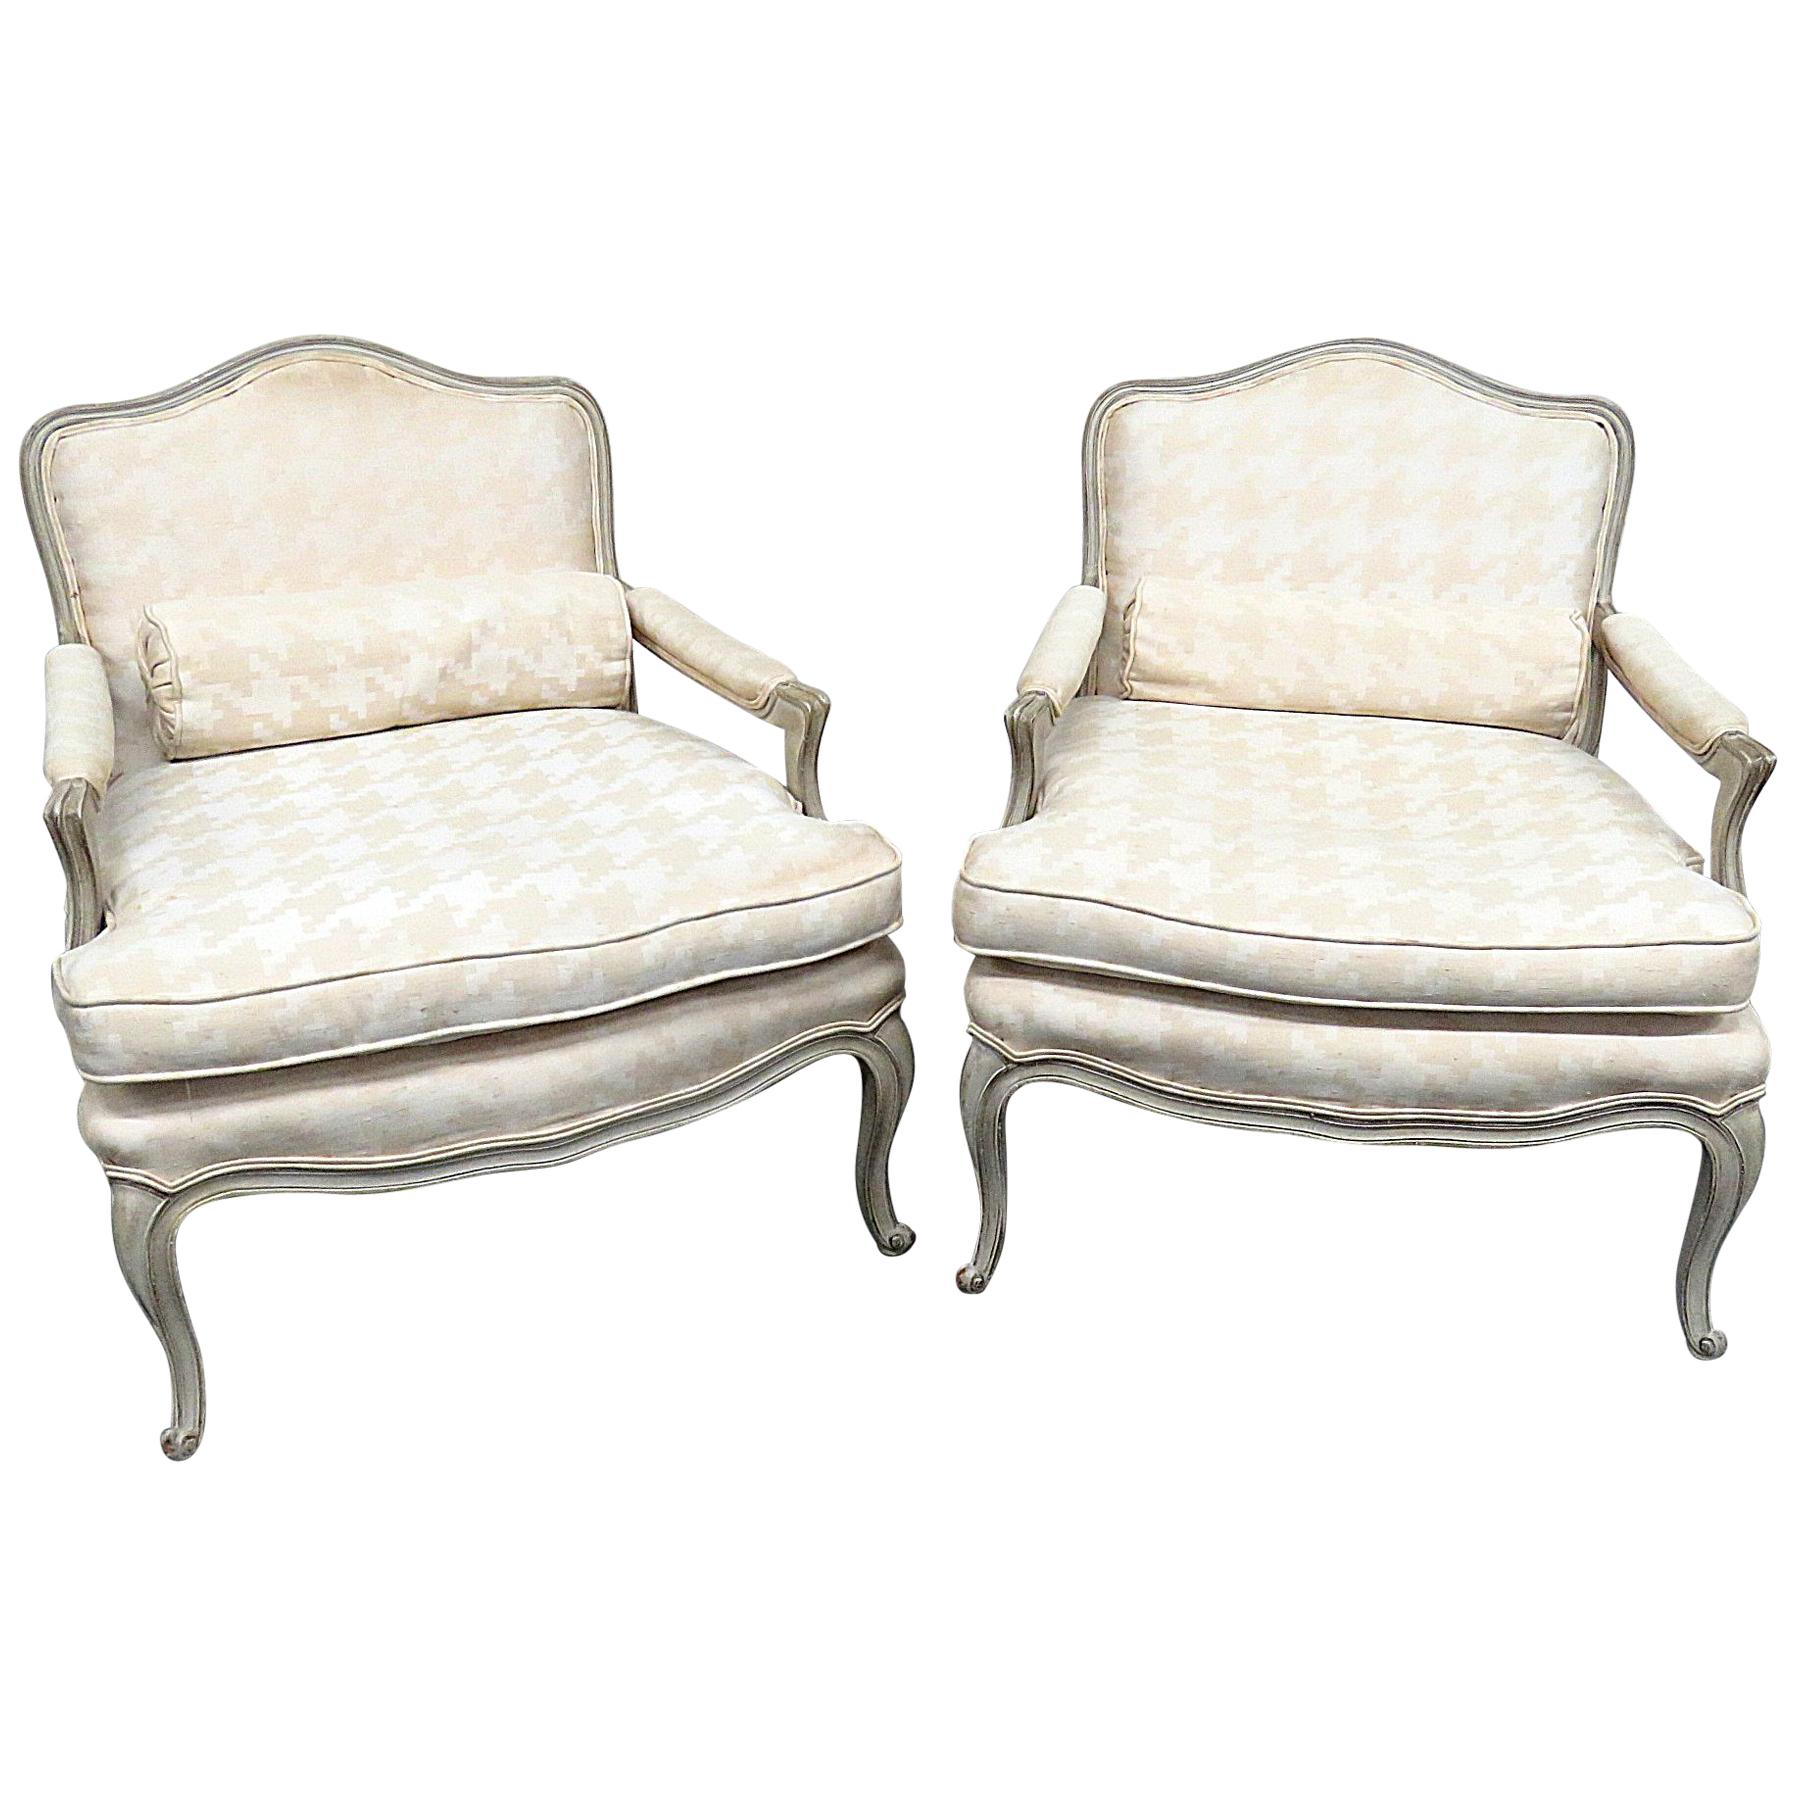 Distress Painted Pair of French Louis XV Style Parlor Armchairs